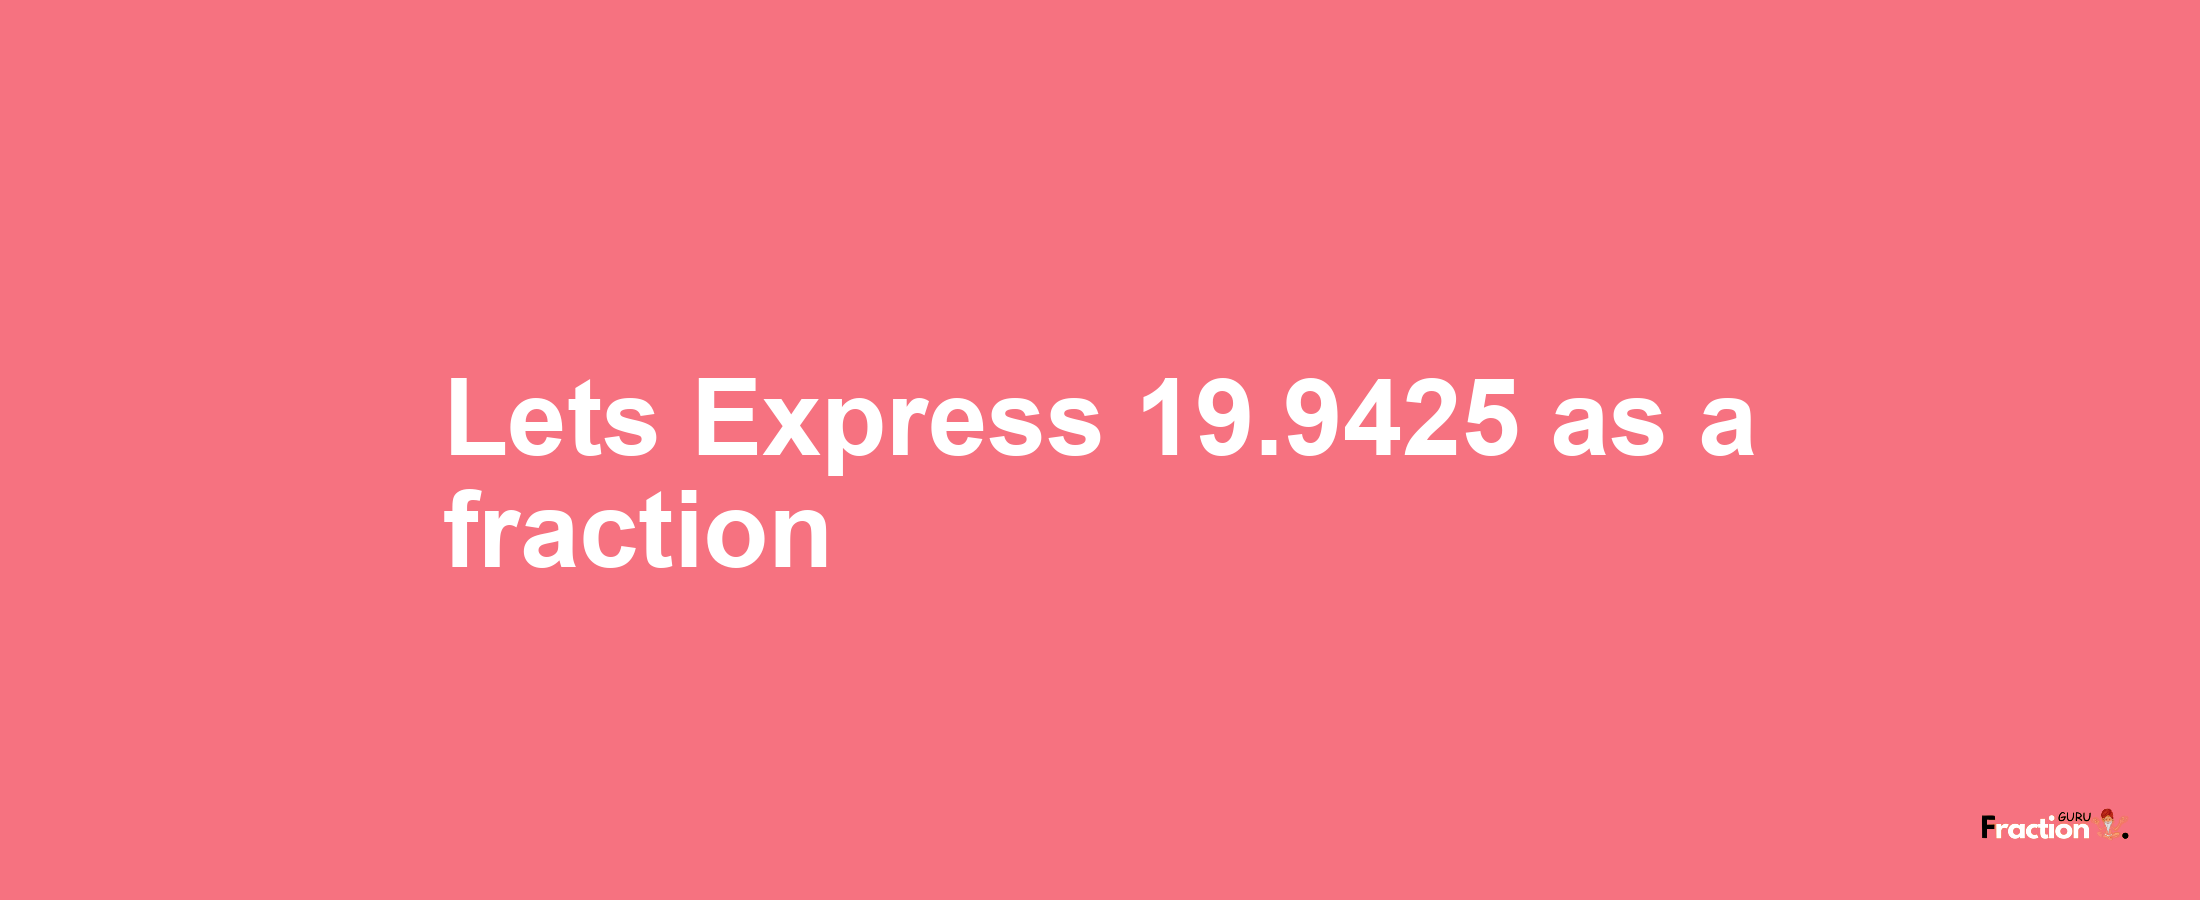 Lets Express 19.9425 as afraction